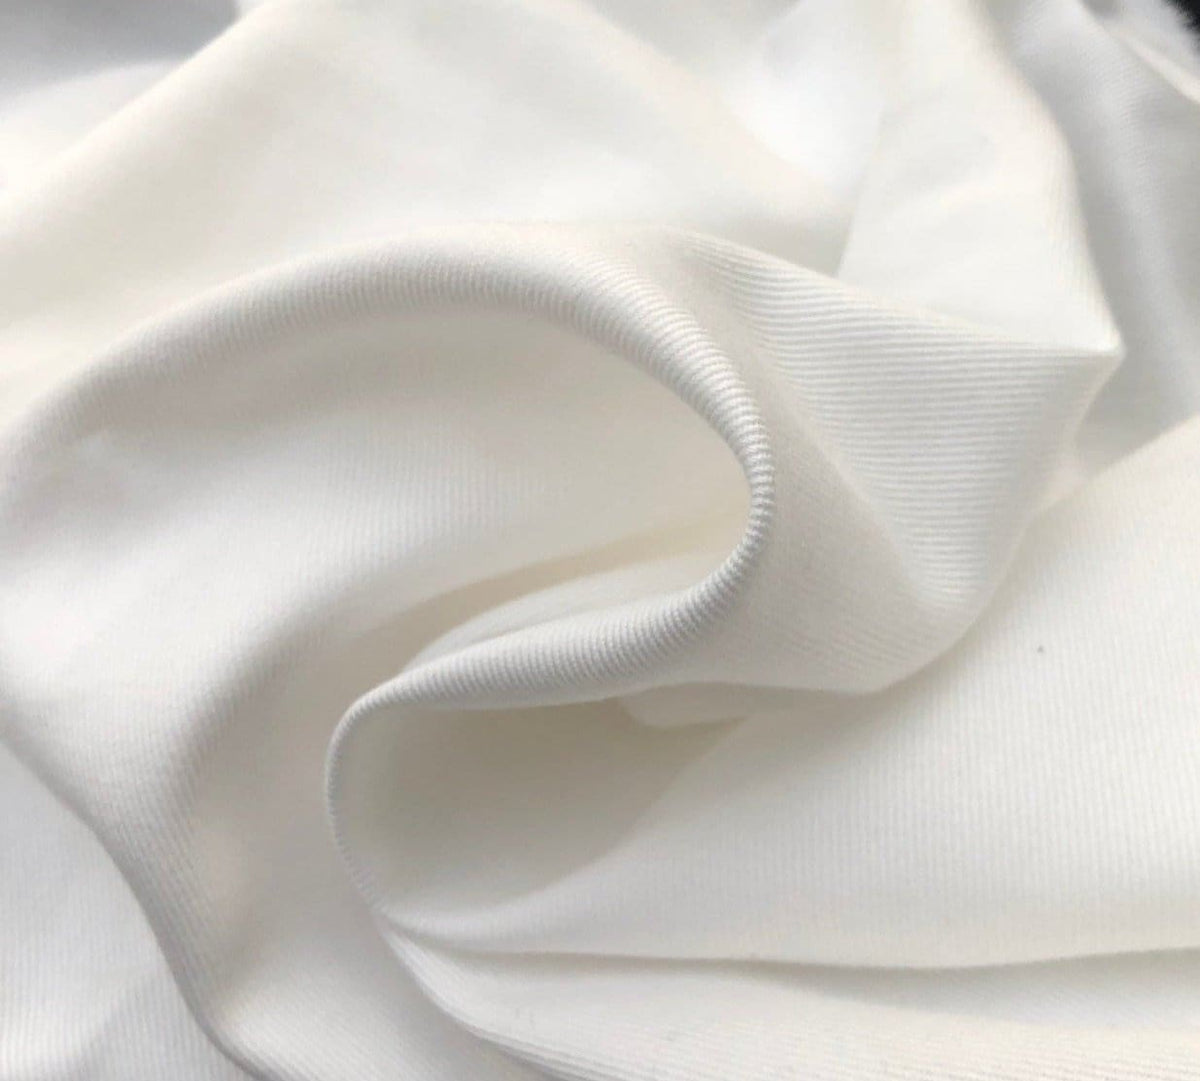 Solid Bright White | Cotton Twill Fabric | 8oz. | 100% Cotton | 68 Wide |  By the Yard